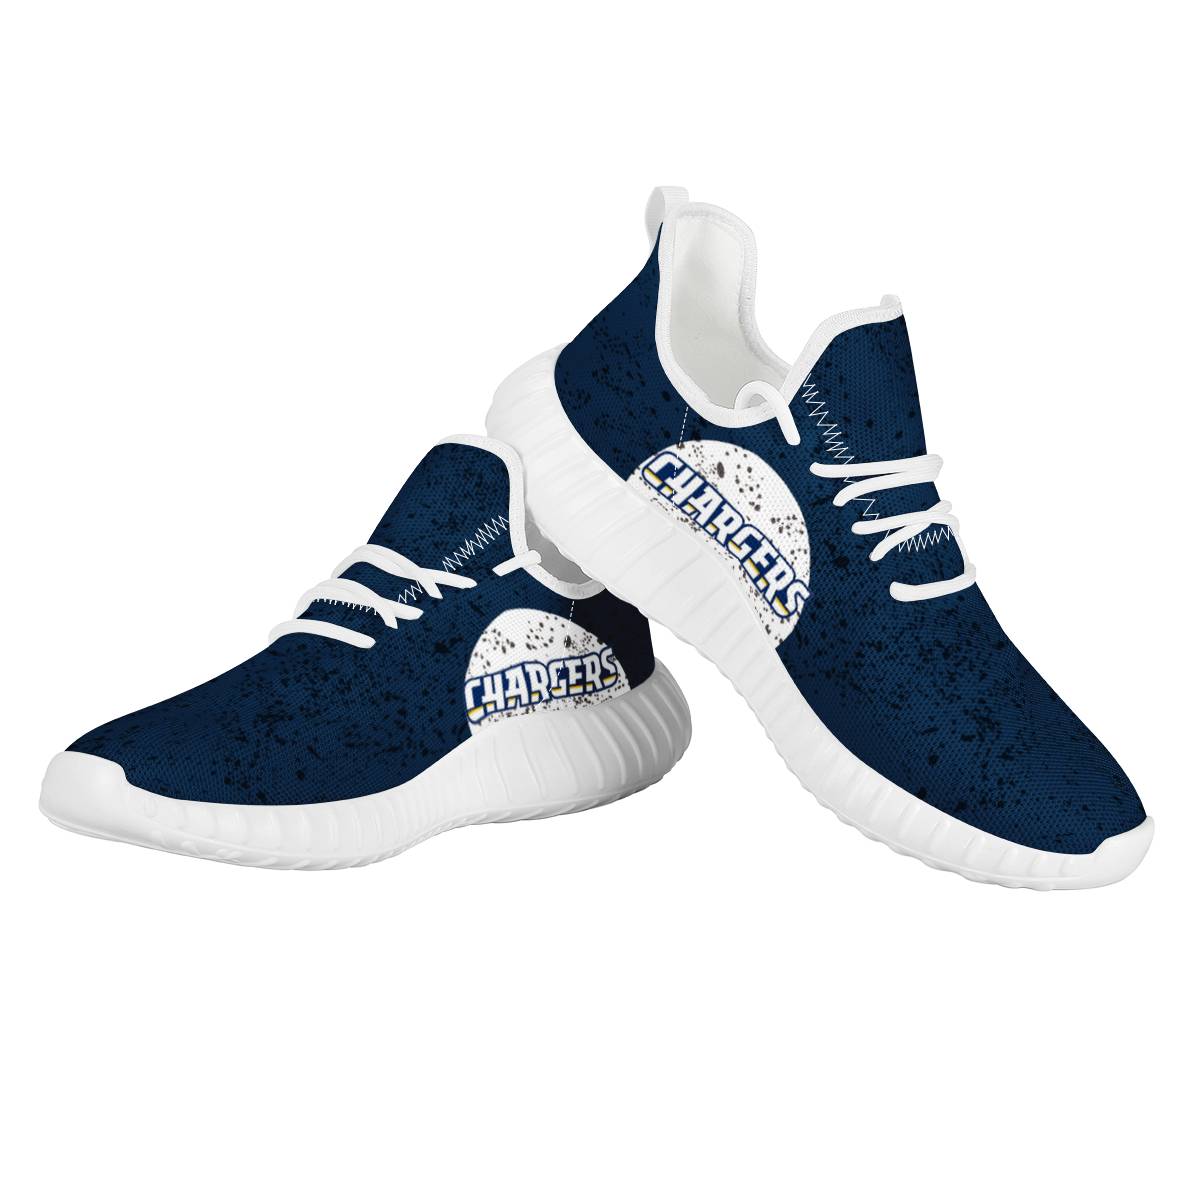 Women's Los Angeles Chargers Mesh Knit Sneakers/Shoes 003